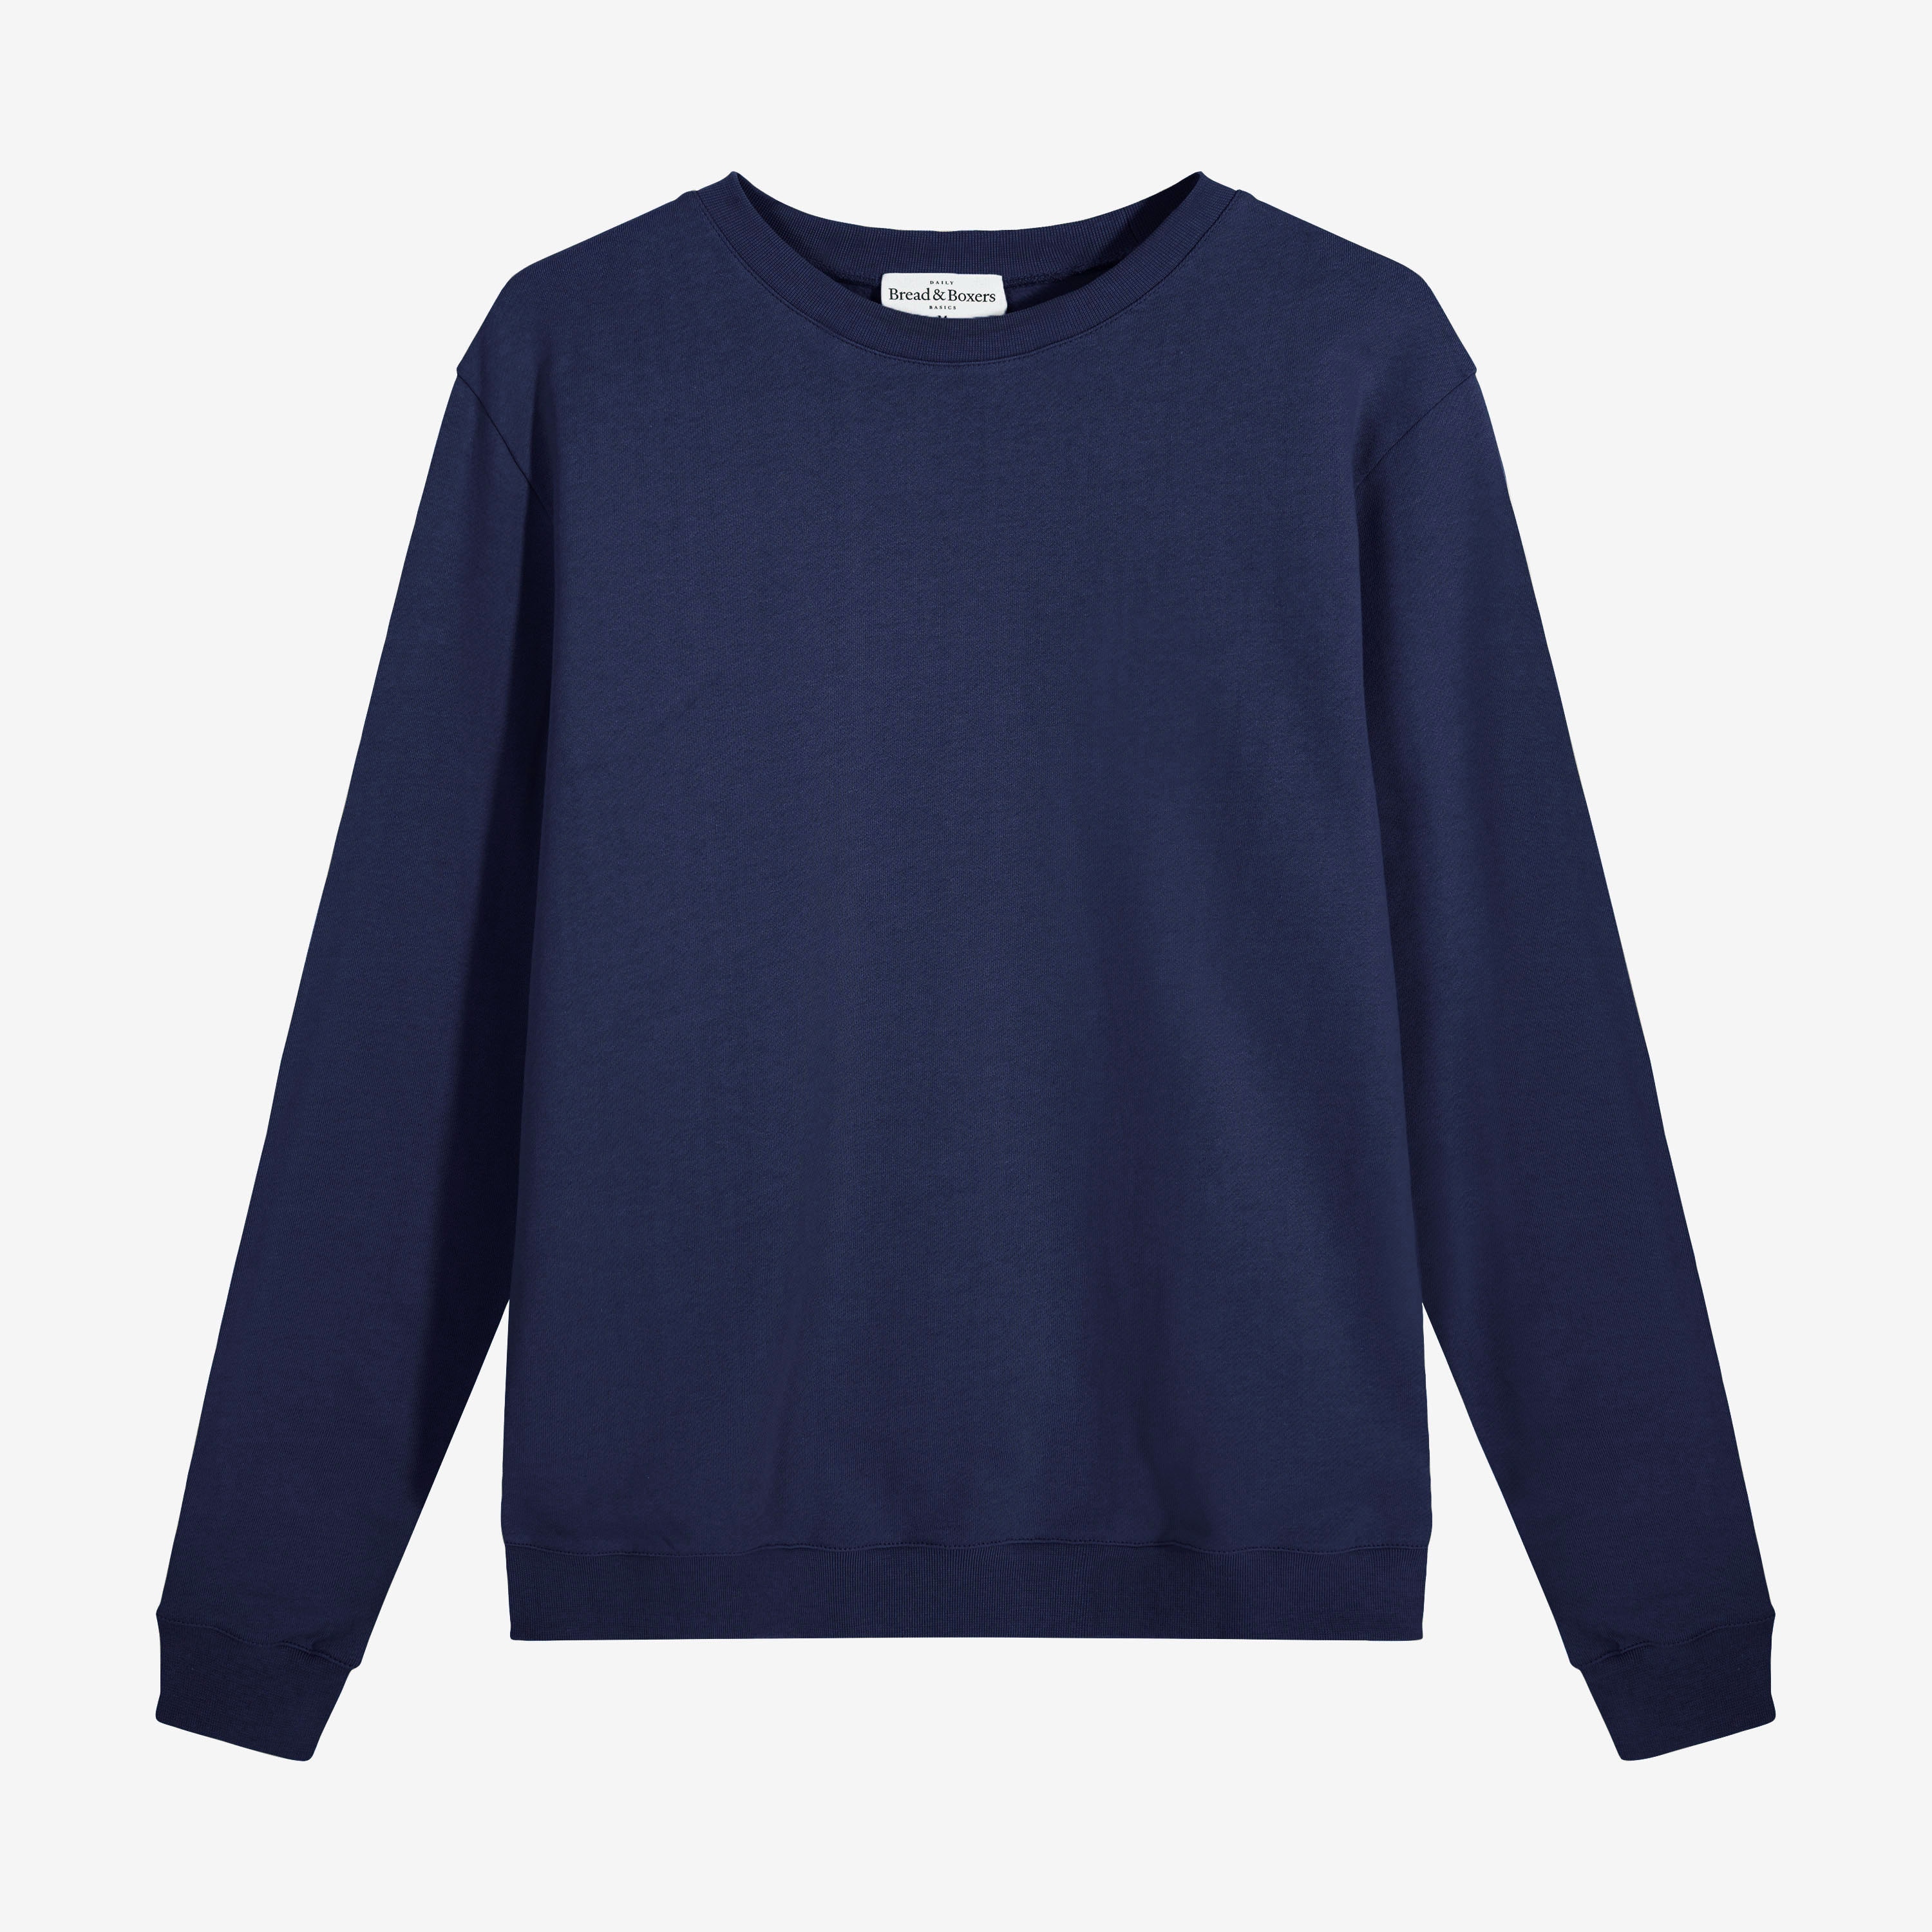 Navy Blue classic Sweatshirt for men made of organic cotton - Bread & Boxers